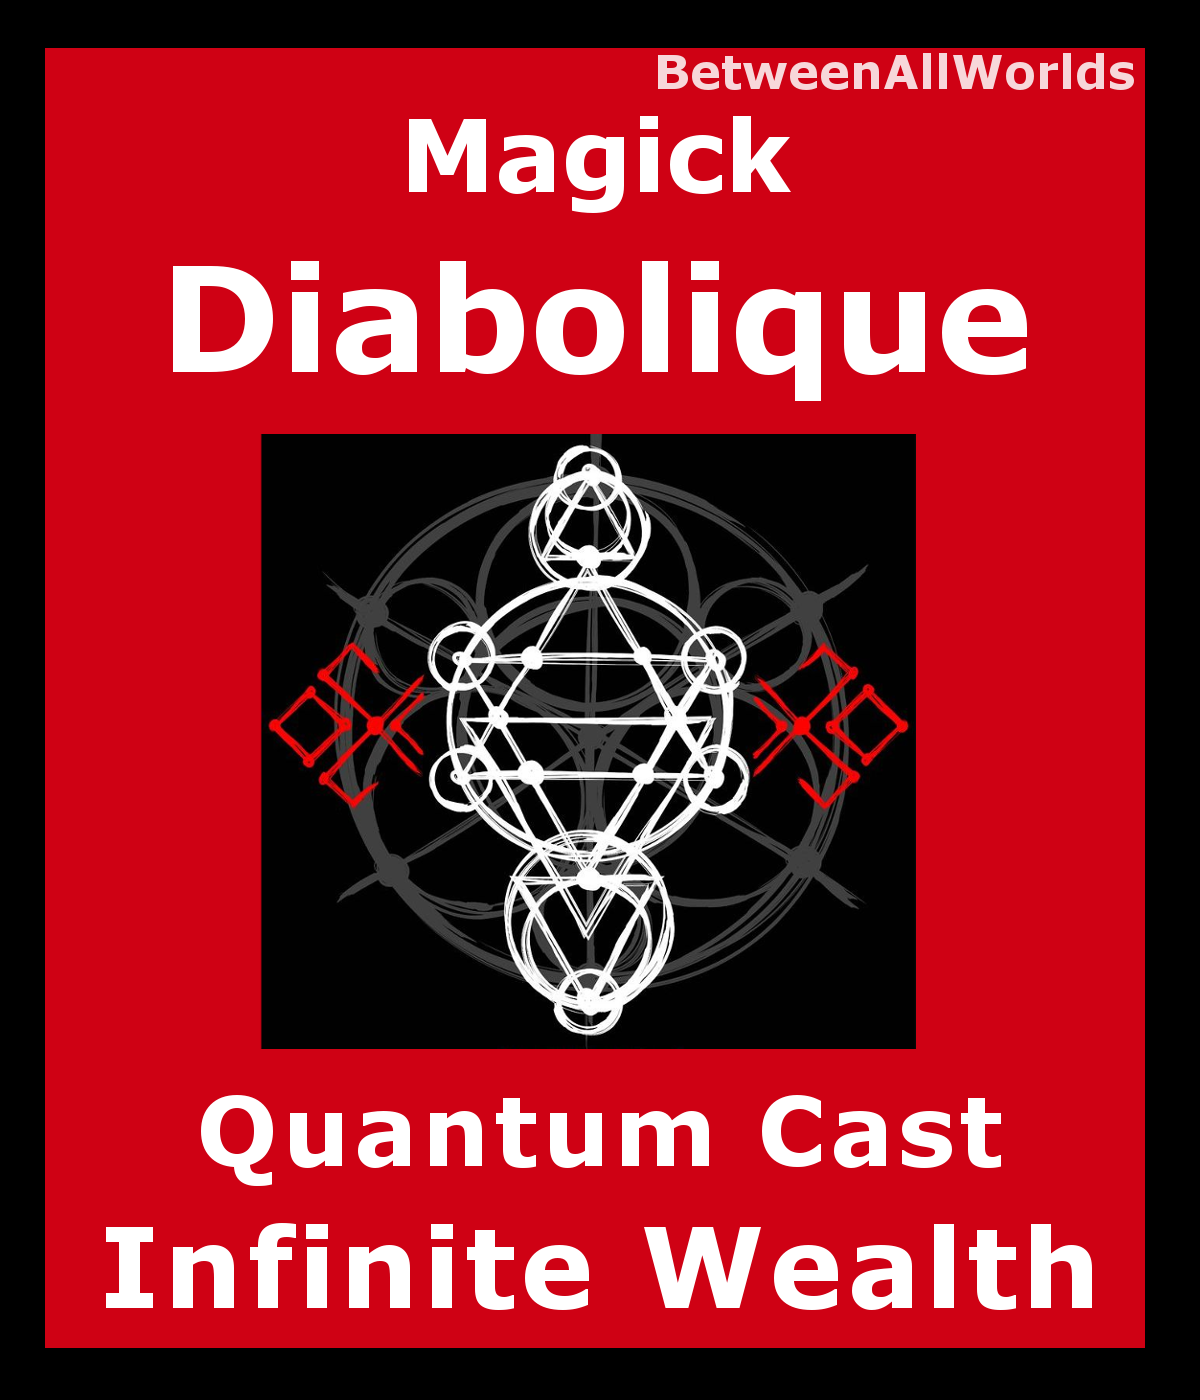 Primary image for Magick Diabolique Immense Wealth Spell Gambling Money Betweenallworlds Ritual